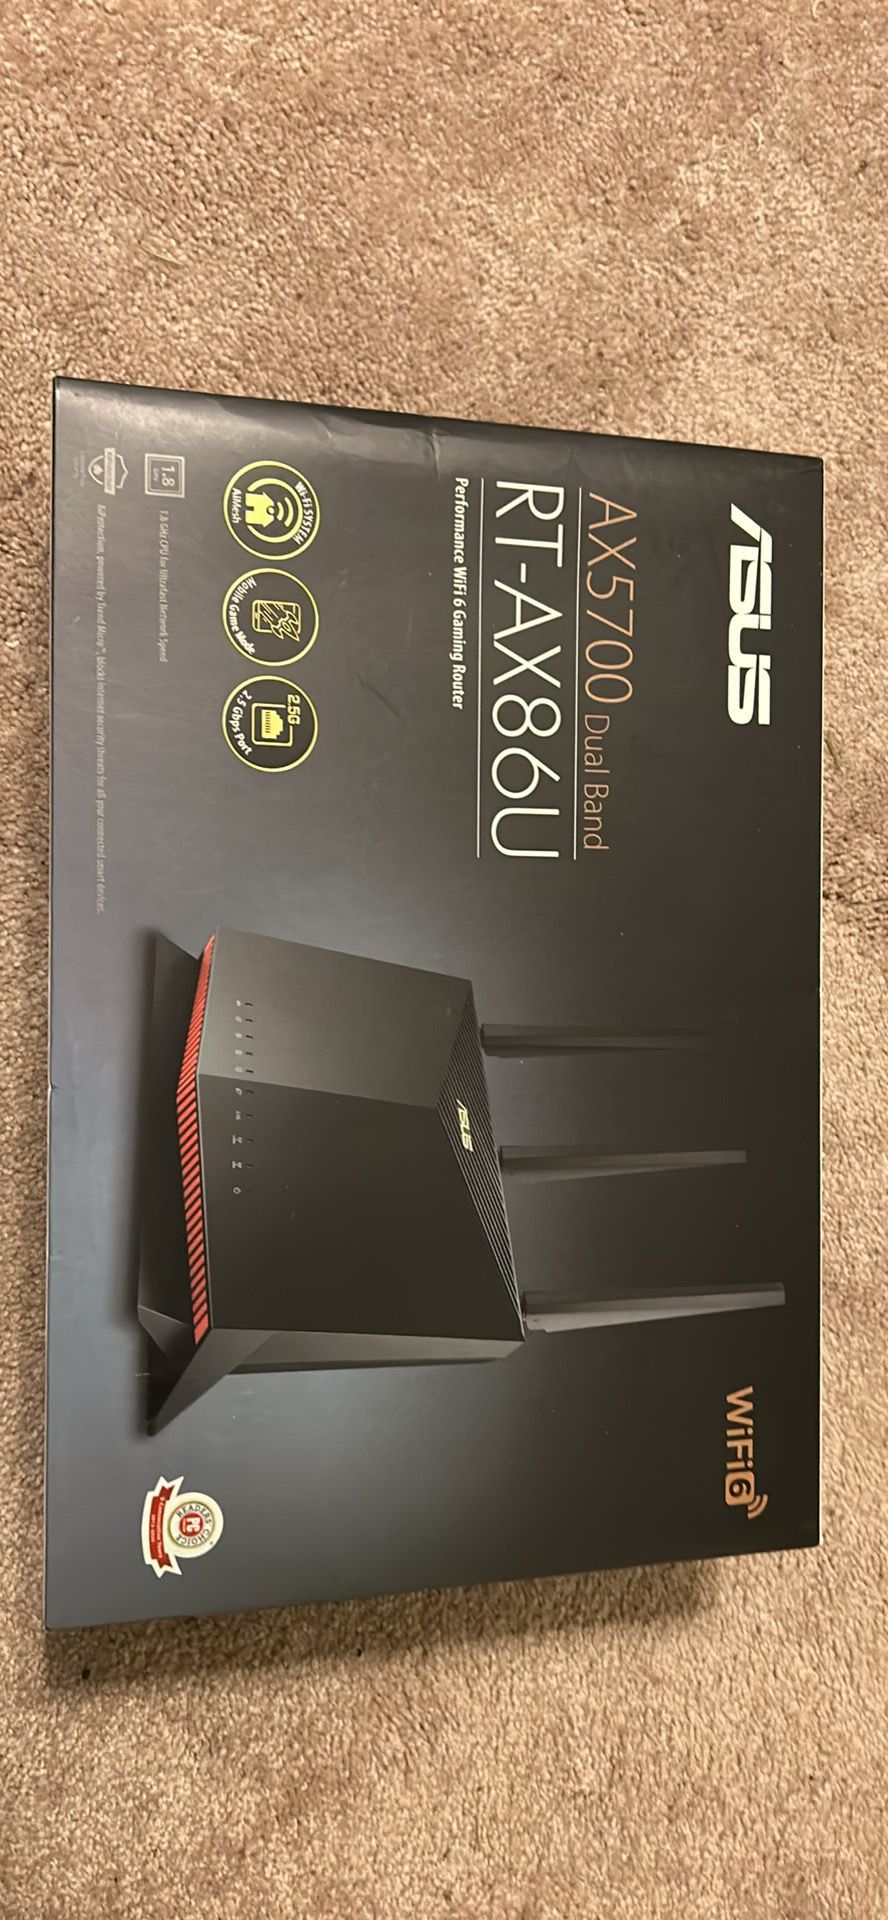 ASUS AX5700 Dual Band Router